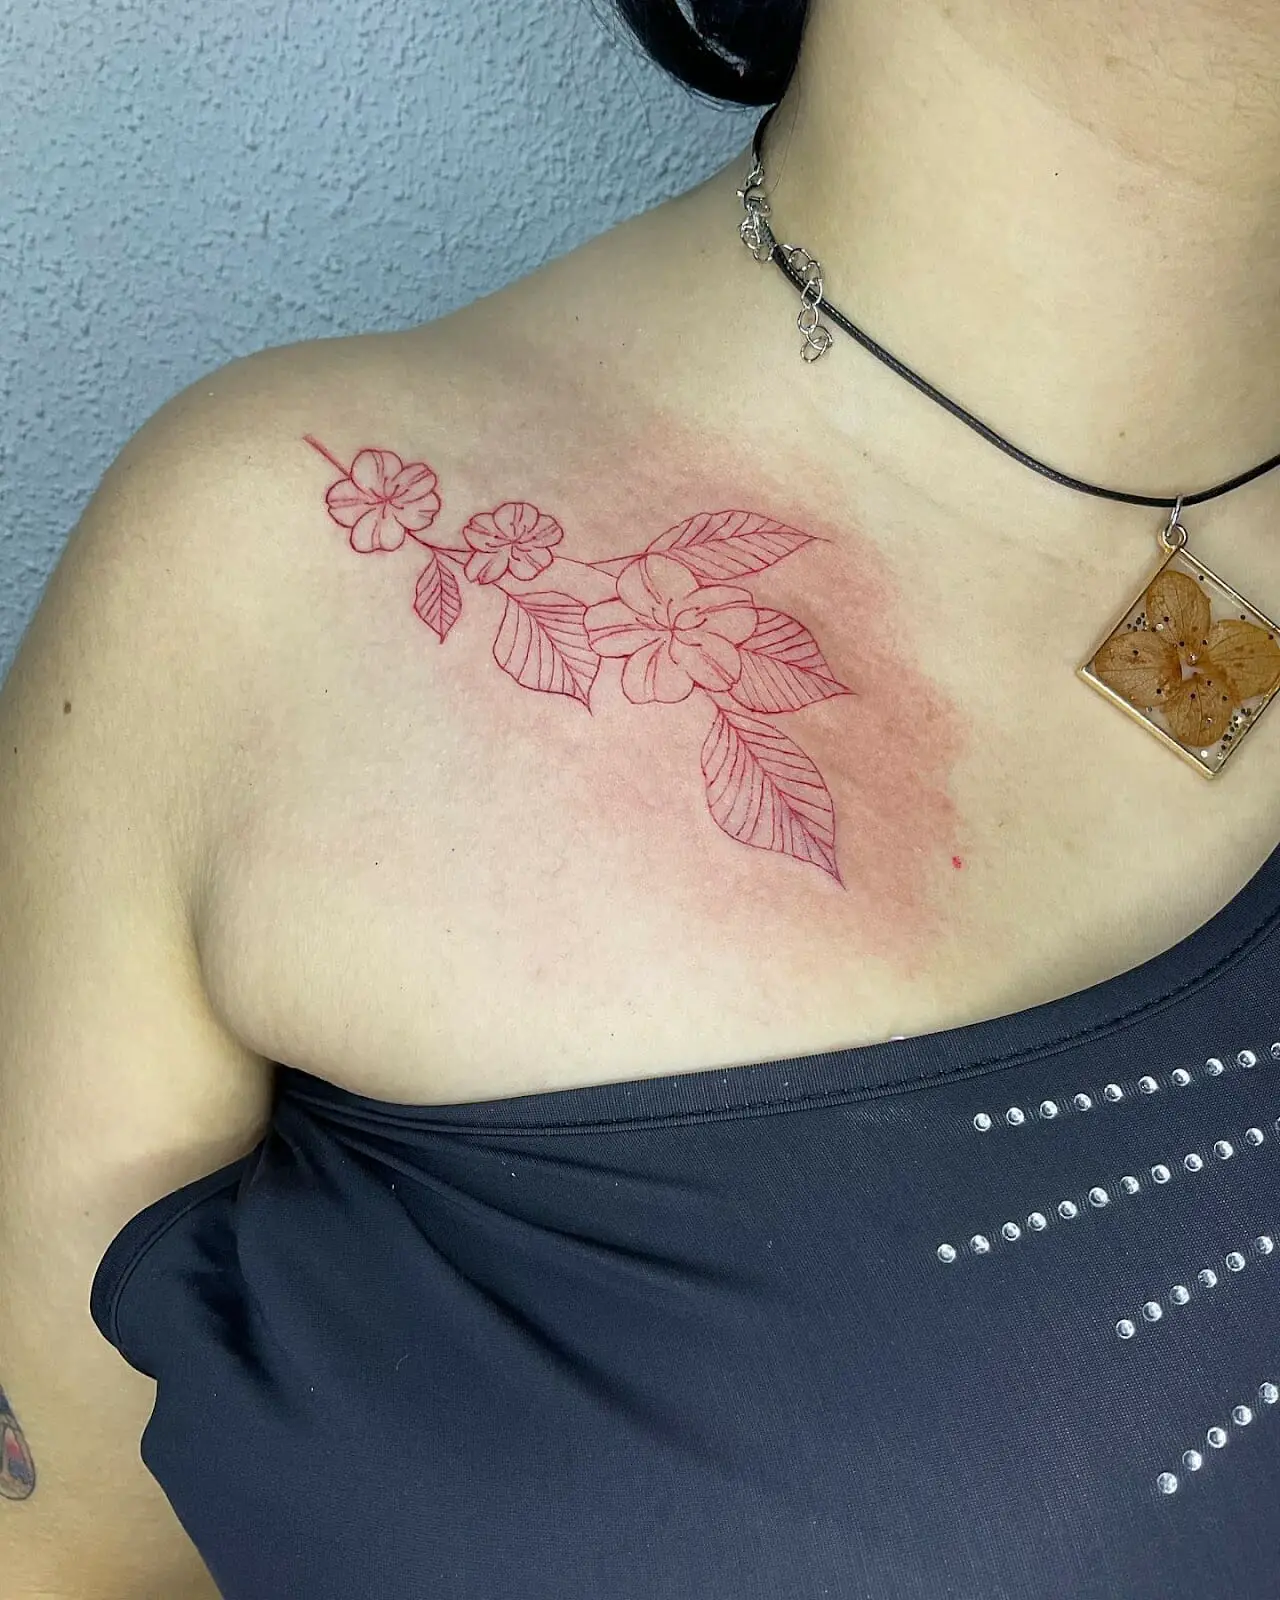 How To Treat Pimples On New Or Old Tattoos?